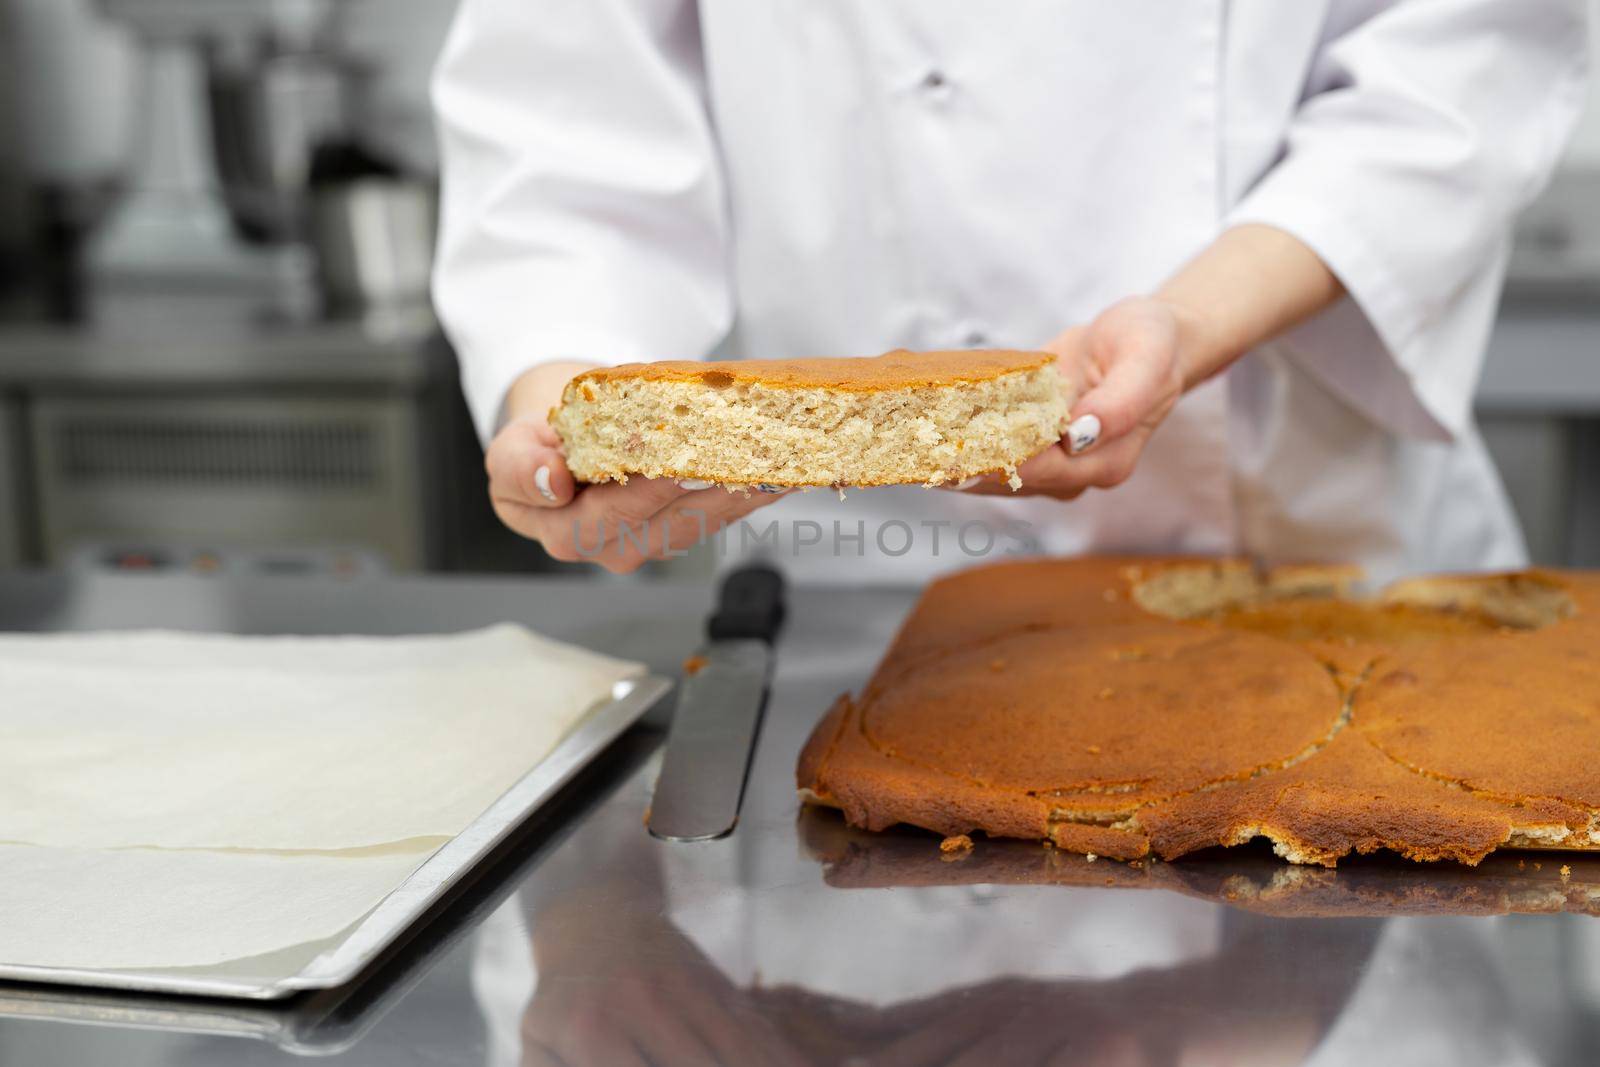 Pastry chef cuts out a cake cake from a biscuit.